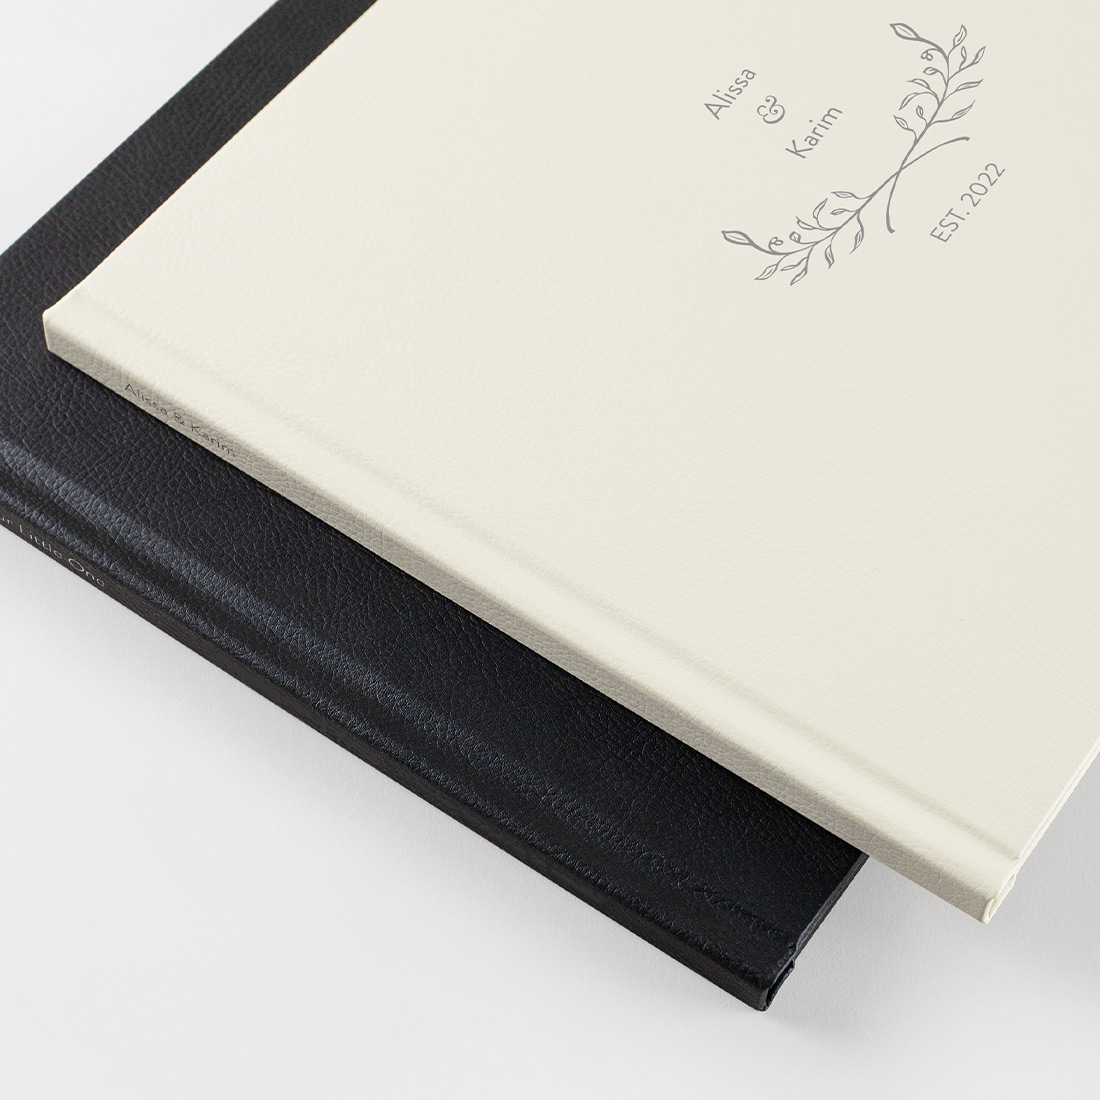 Two photo books bound in Vegan Leather